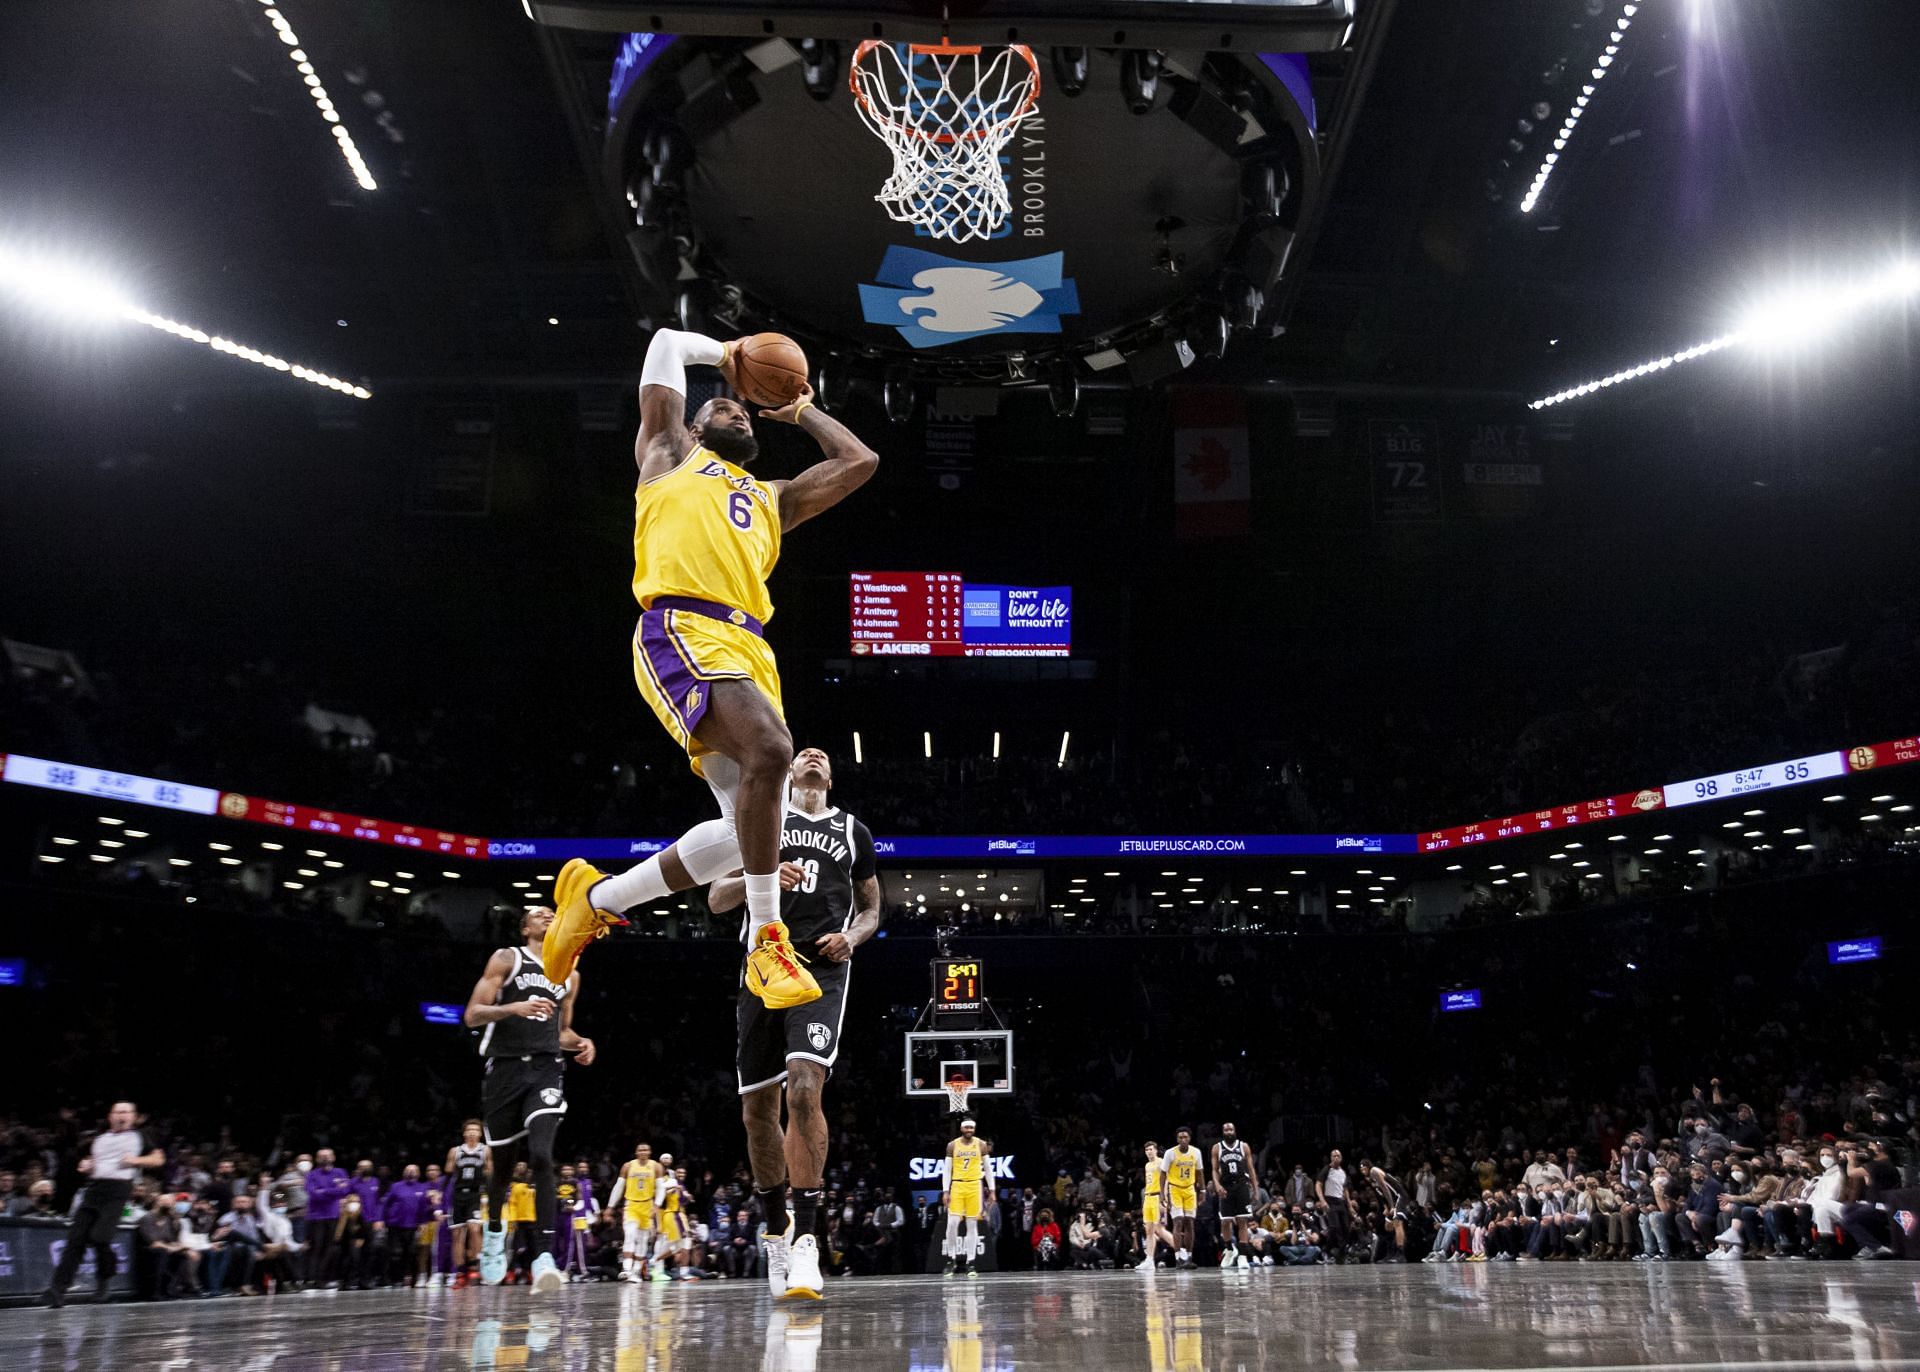 LeBron James of the LA Lakers dunks against the Brooklyn Nets.